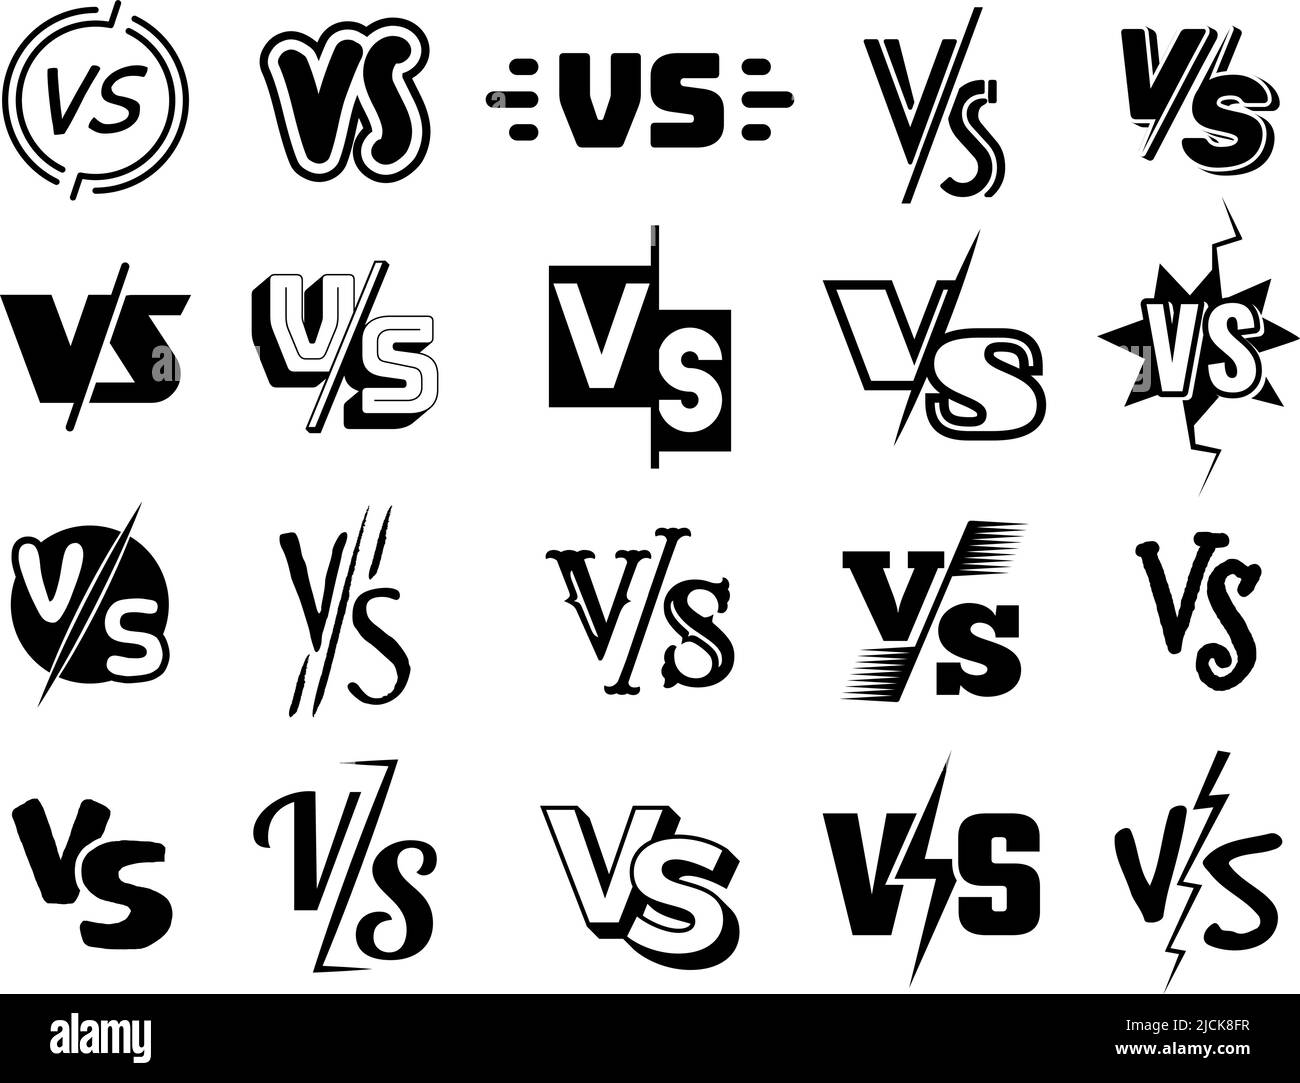 Duel lettering. Vs fonts teams concurrence battling fighting fonts tournament icon recent vector isolated templates collection Stock Vector